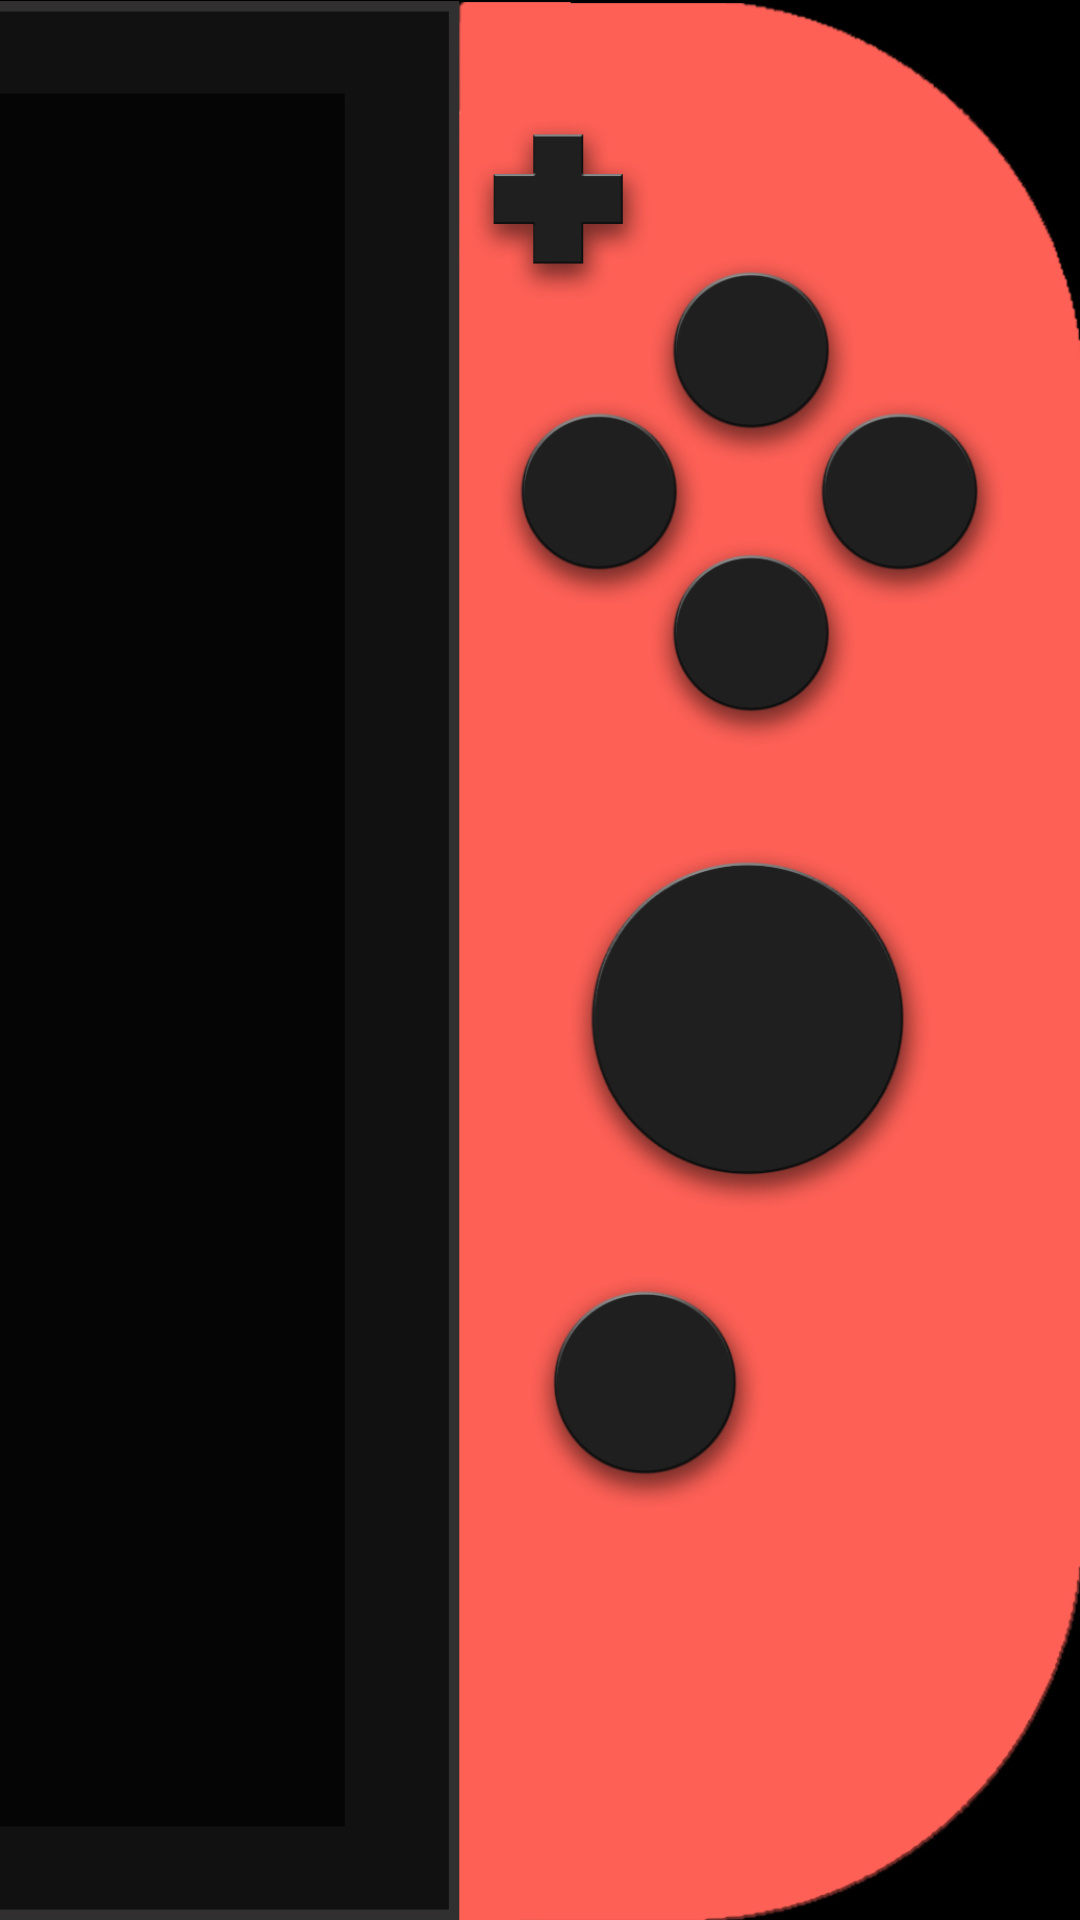 Nintendo: Ability to “switch” from home console to handheld game, Minimalistic. 1080x1920 Full HD Wallpaper.